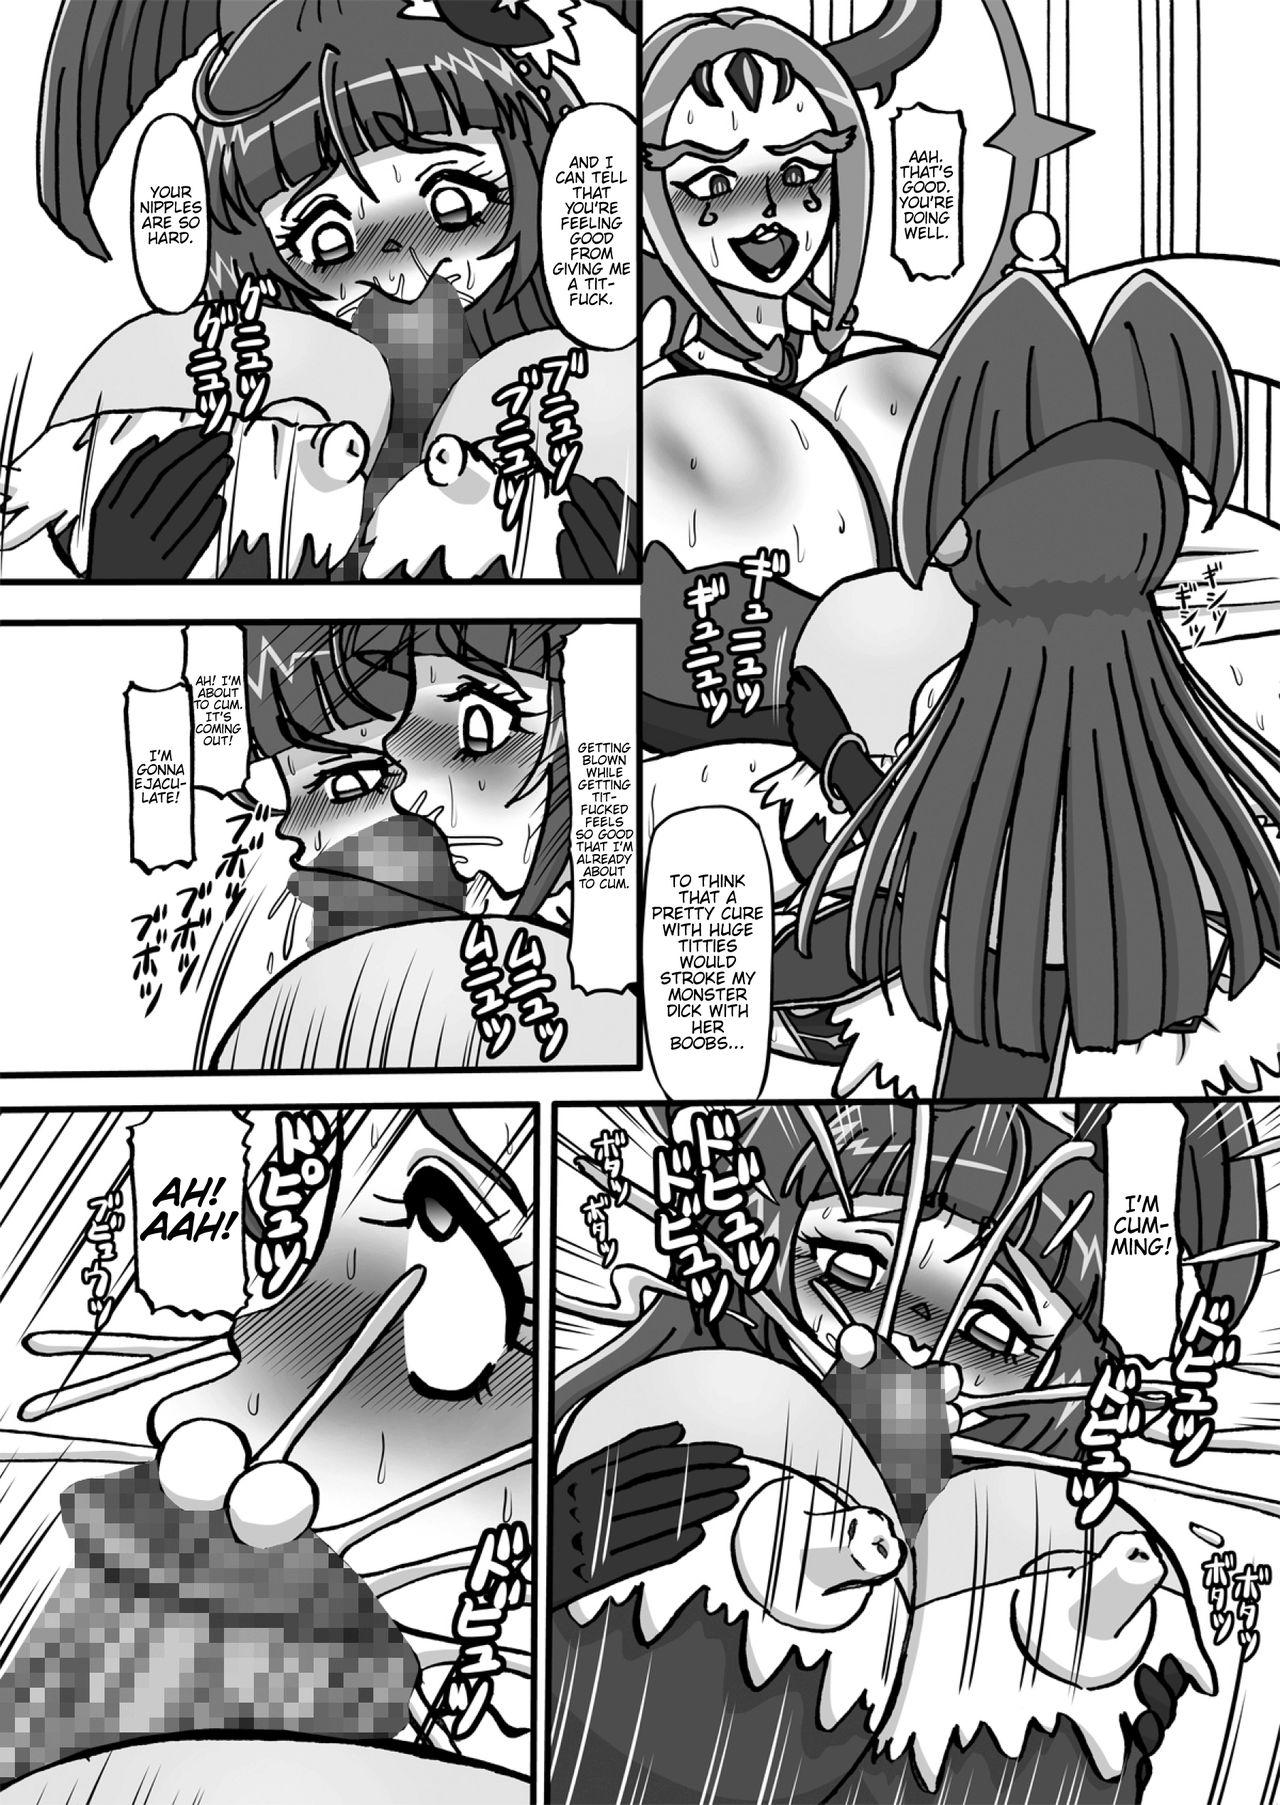 Licking Sweetie Girls 17 - Maho girls precure Romance - Page 14